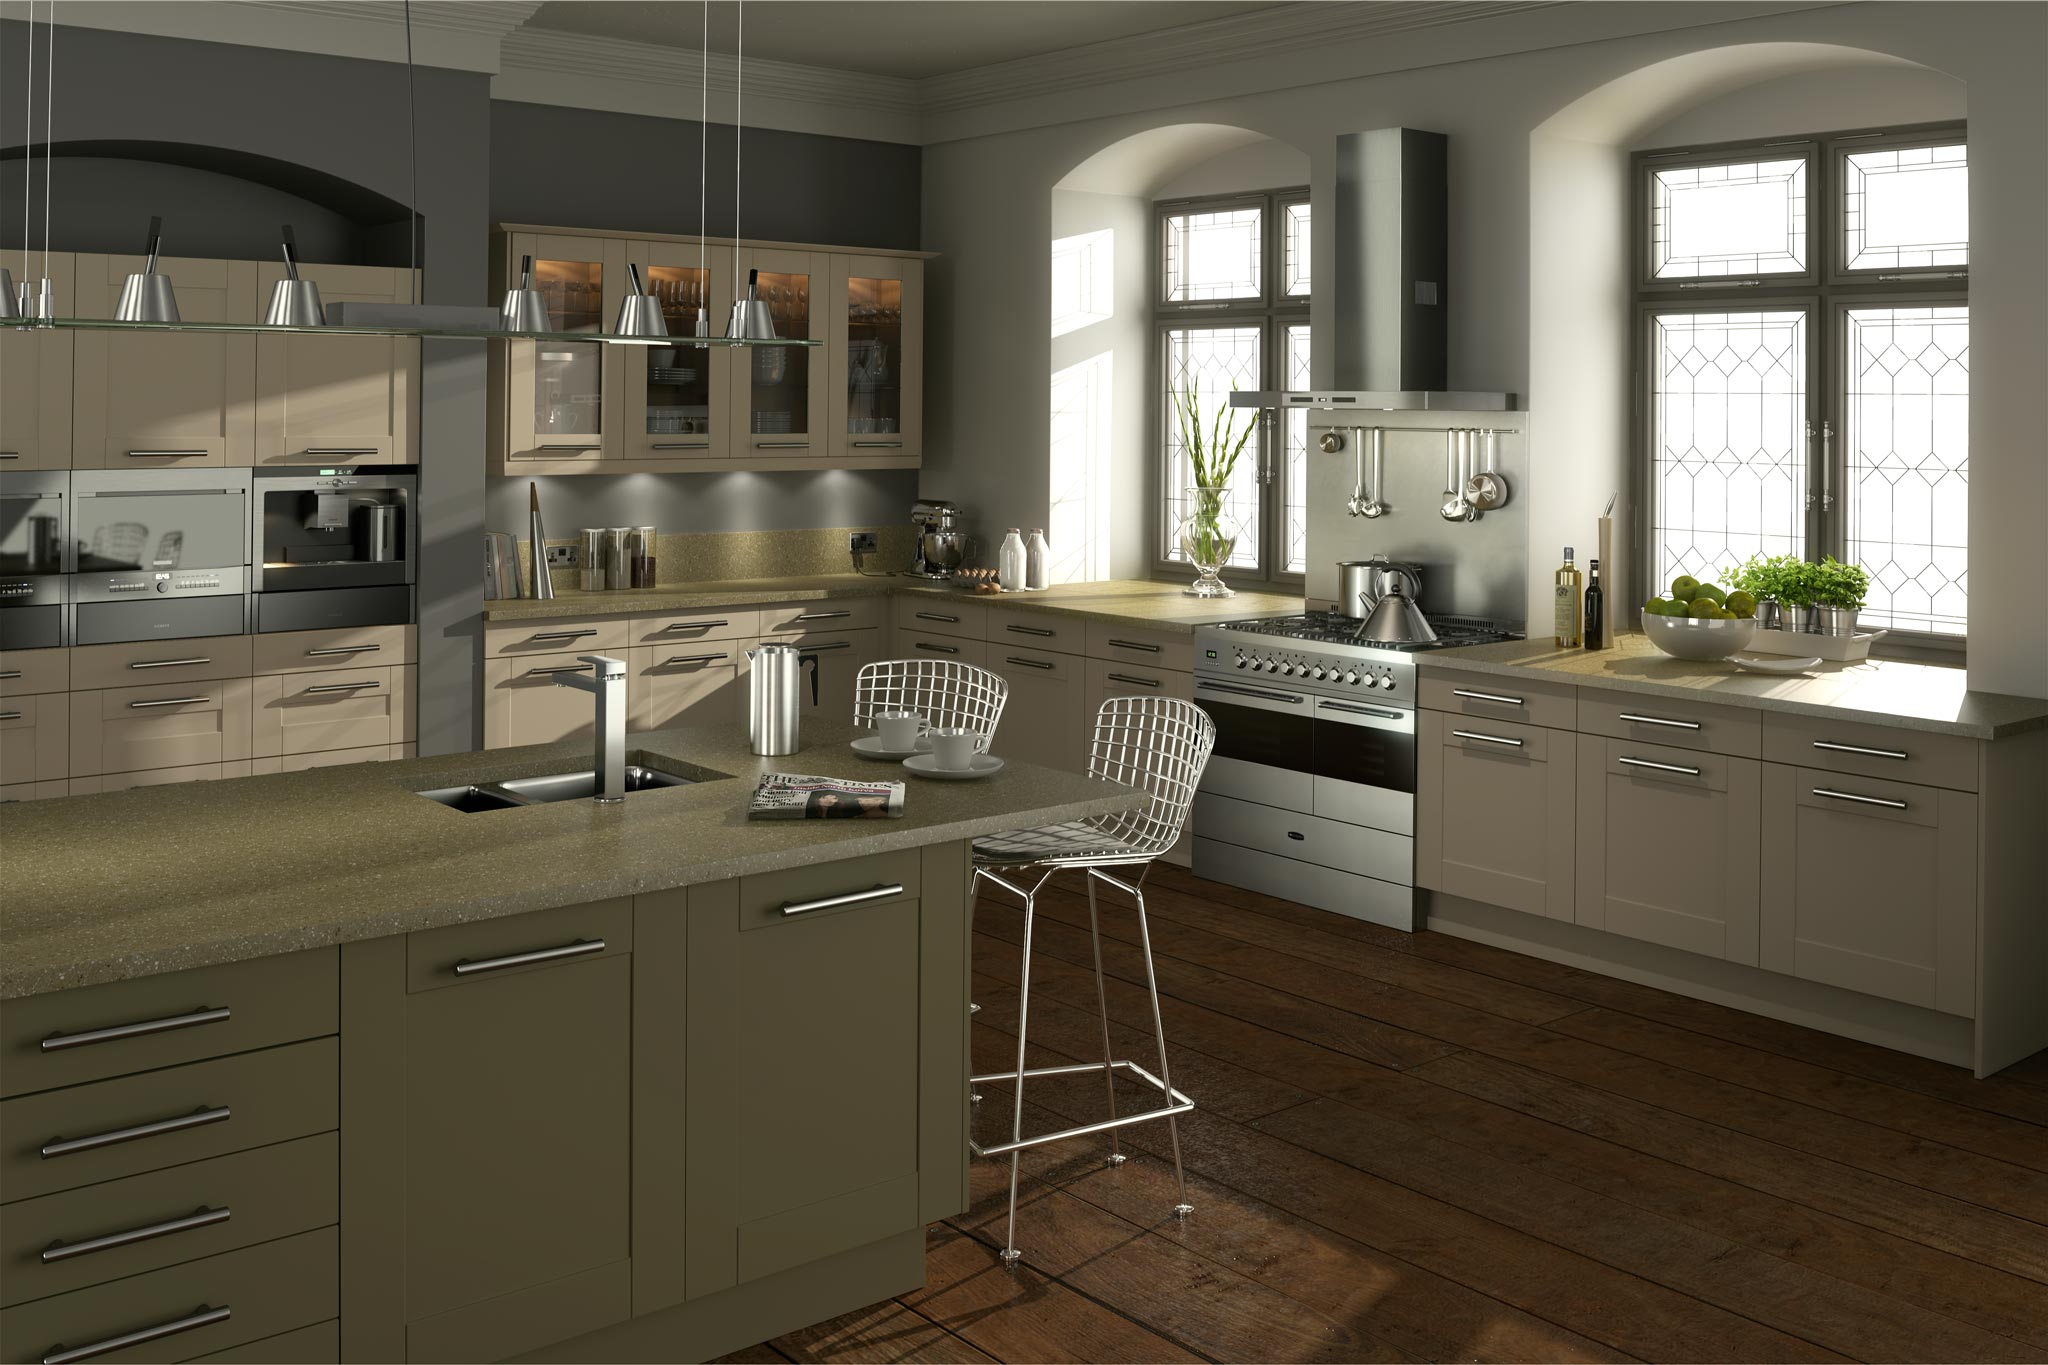 Kitchen with iconic shaker style cupboard doors